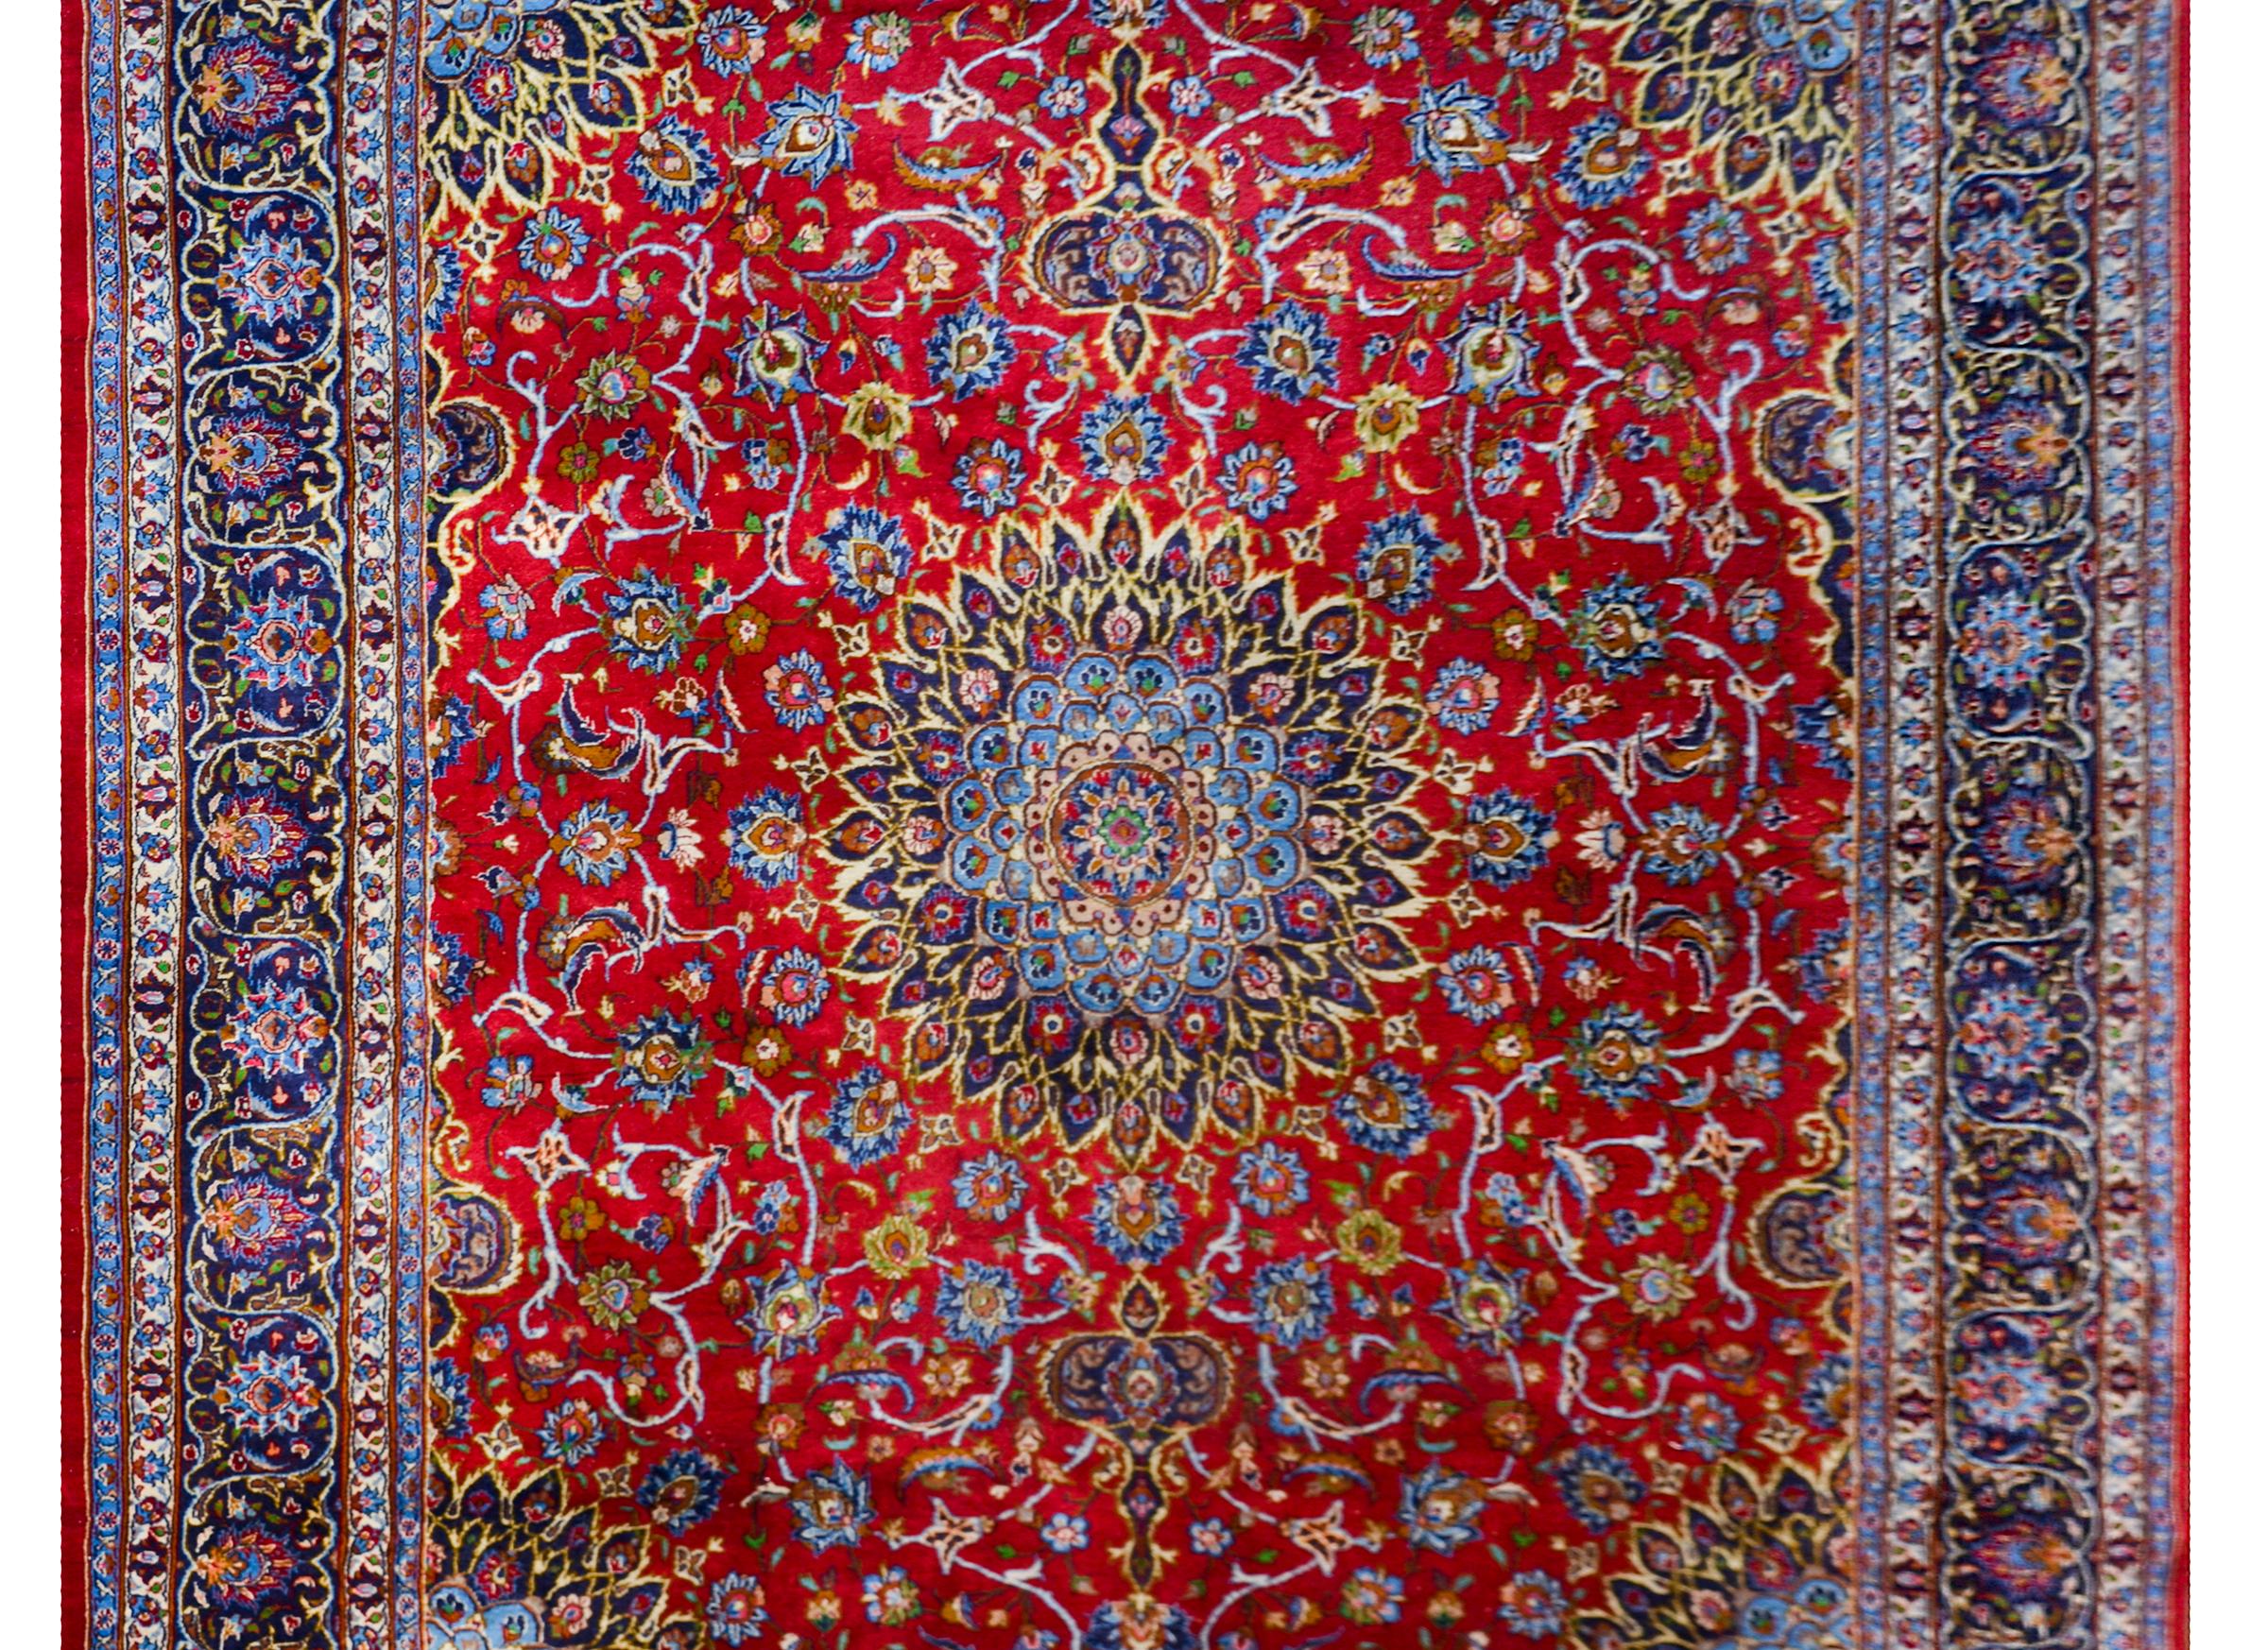 A beautiful vintage Persian Birjand rug with a large central medallion woven in rich indigos, golds, and greens, amidst a field of flowers and scrolling vines against a crimson background. The border is wide with multiple floral and scrolling